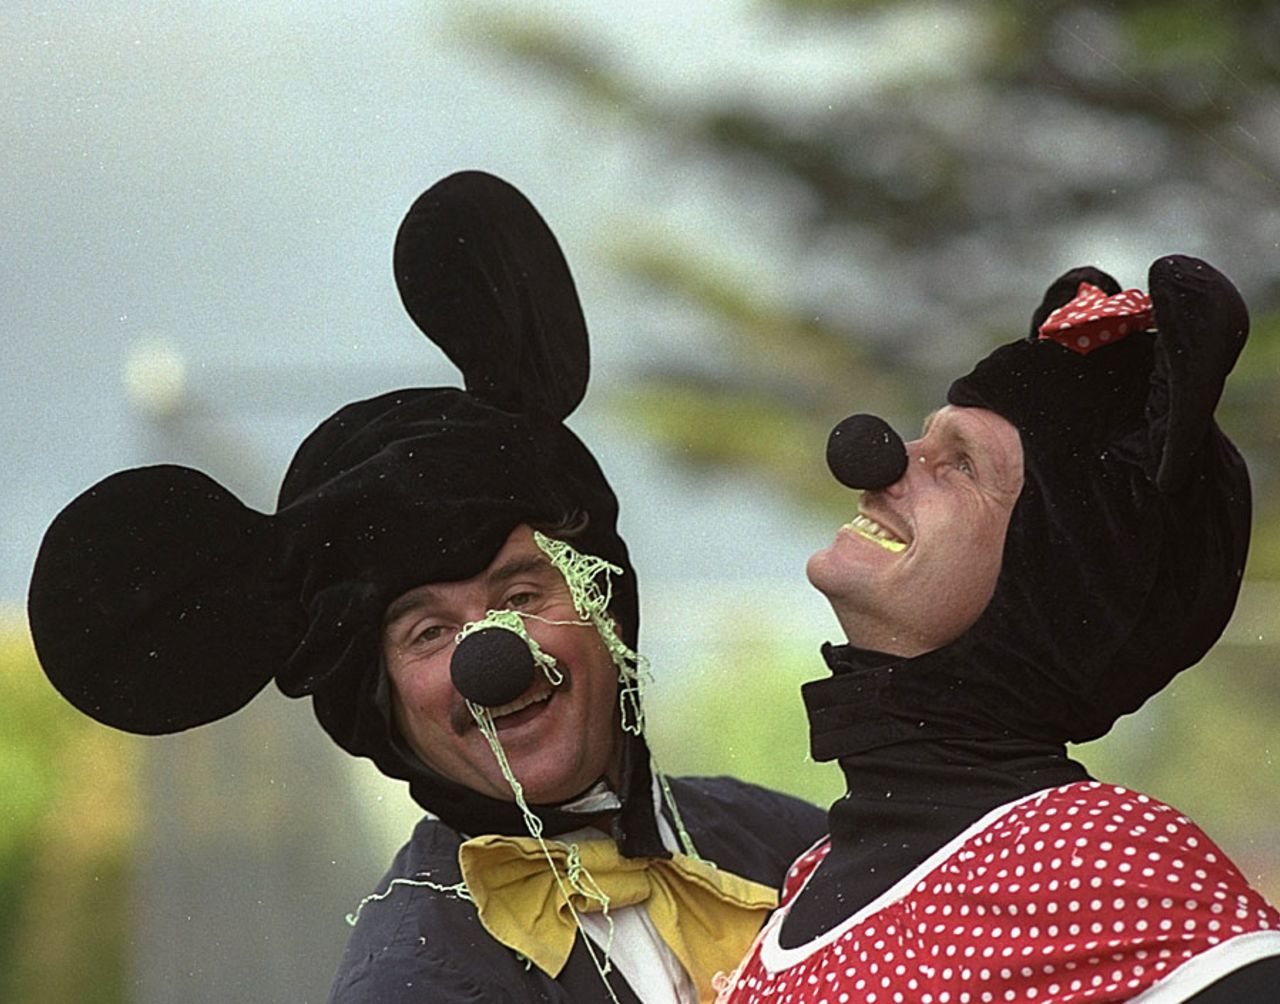 Allan Lamb and Robin Smith dressed as Mickey and Minnie Mouse, January 1, 1991